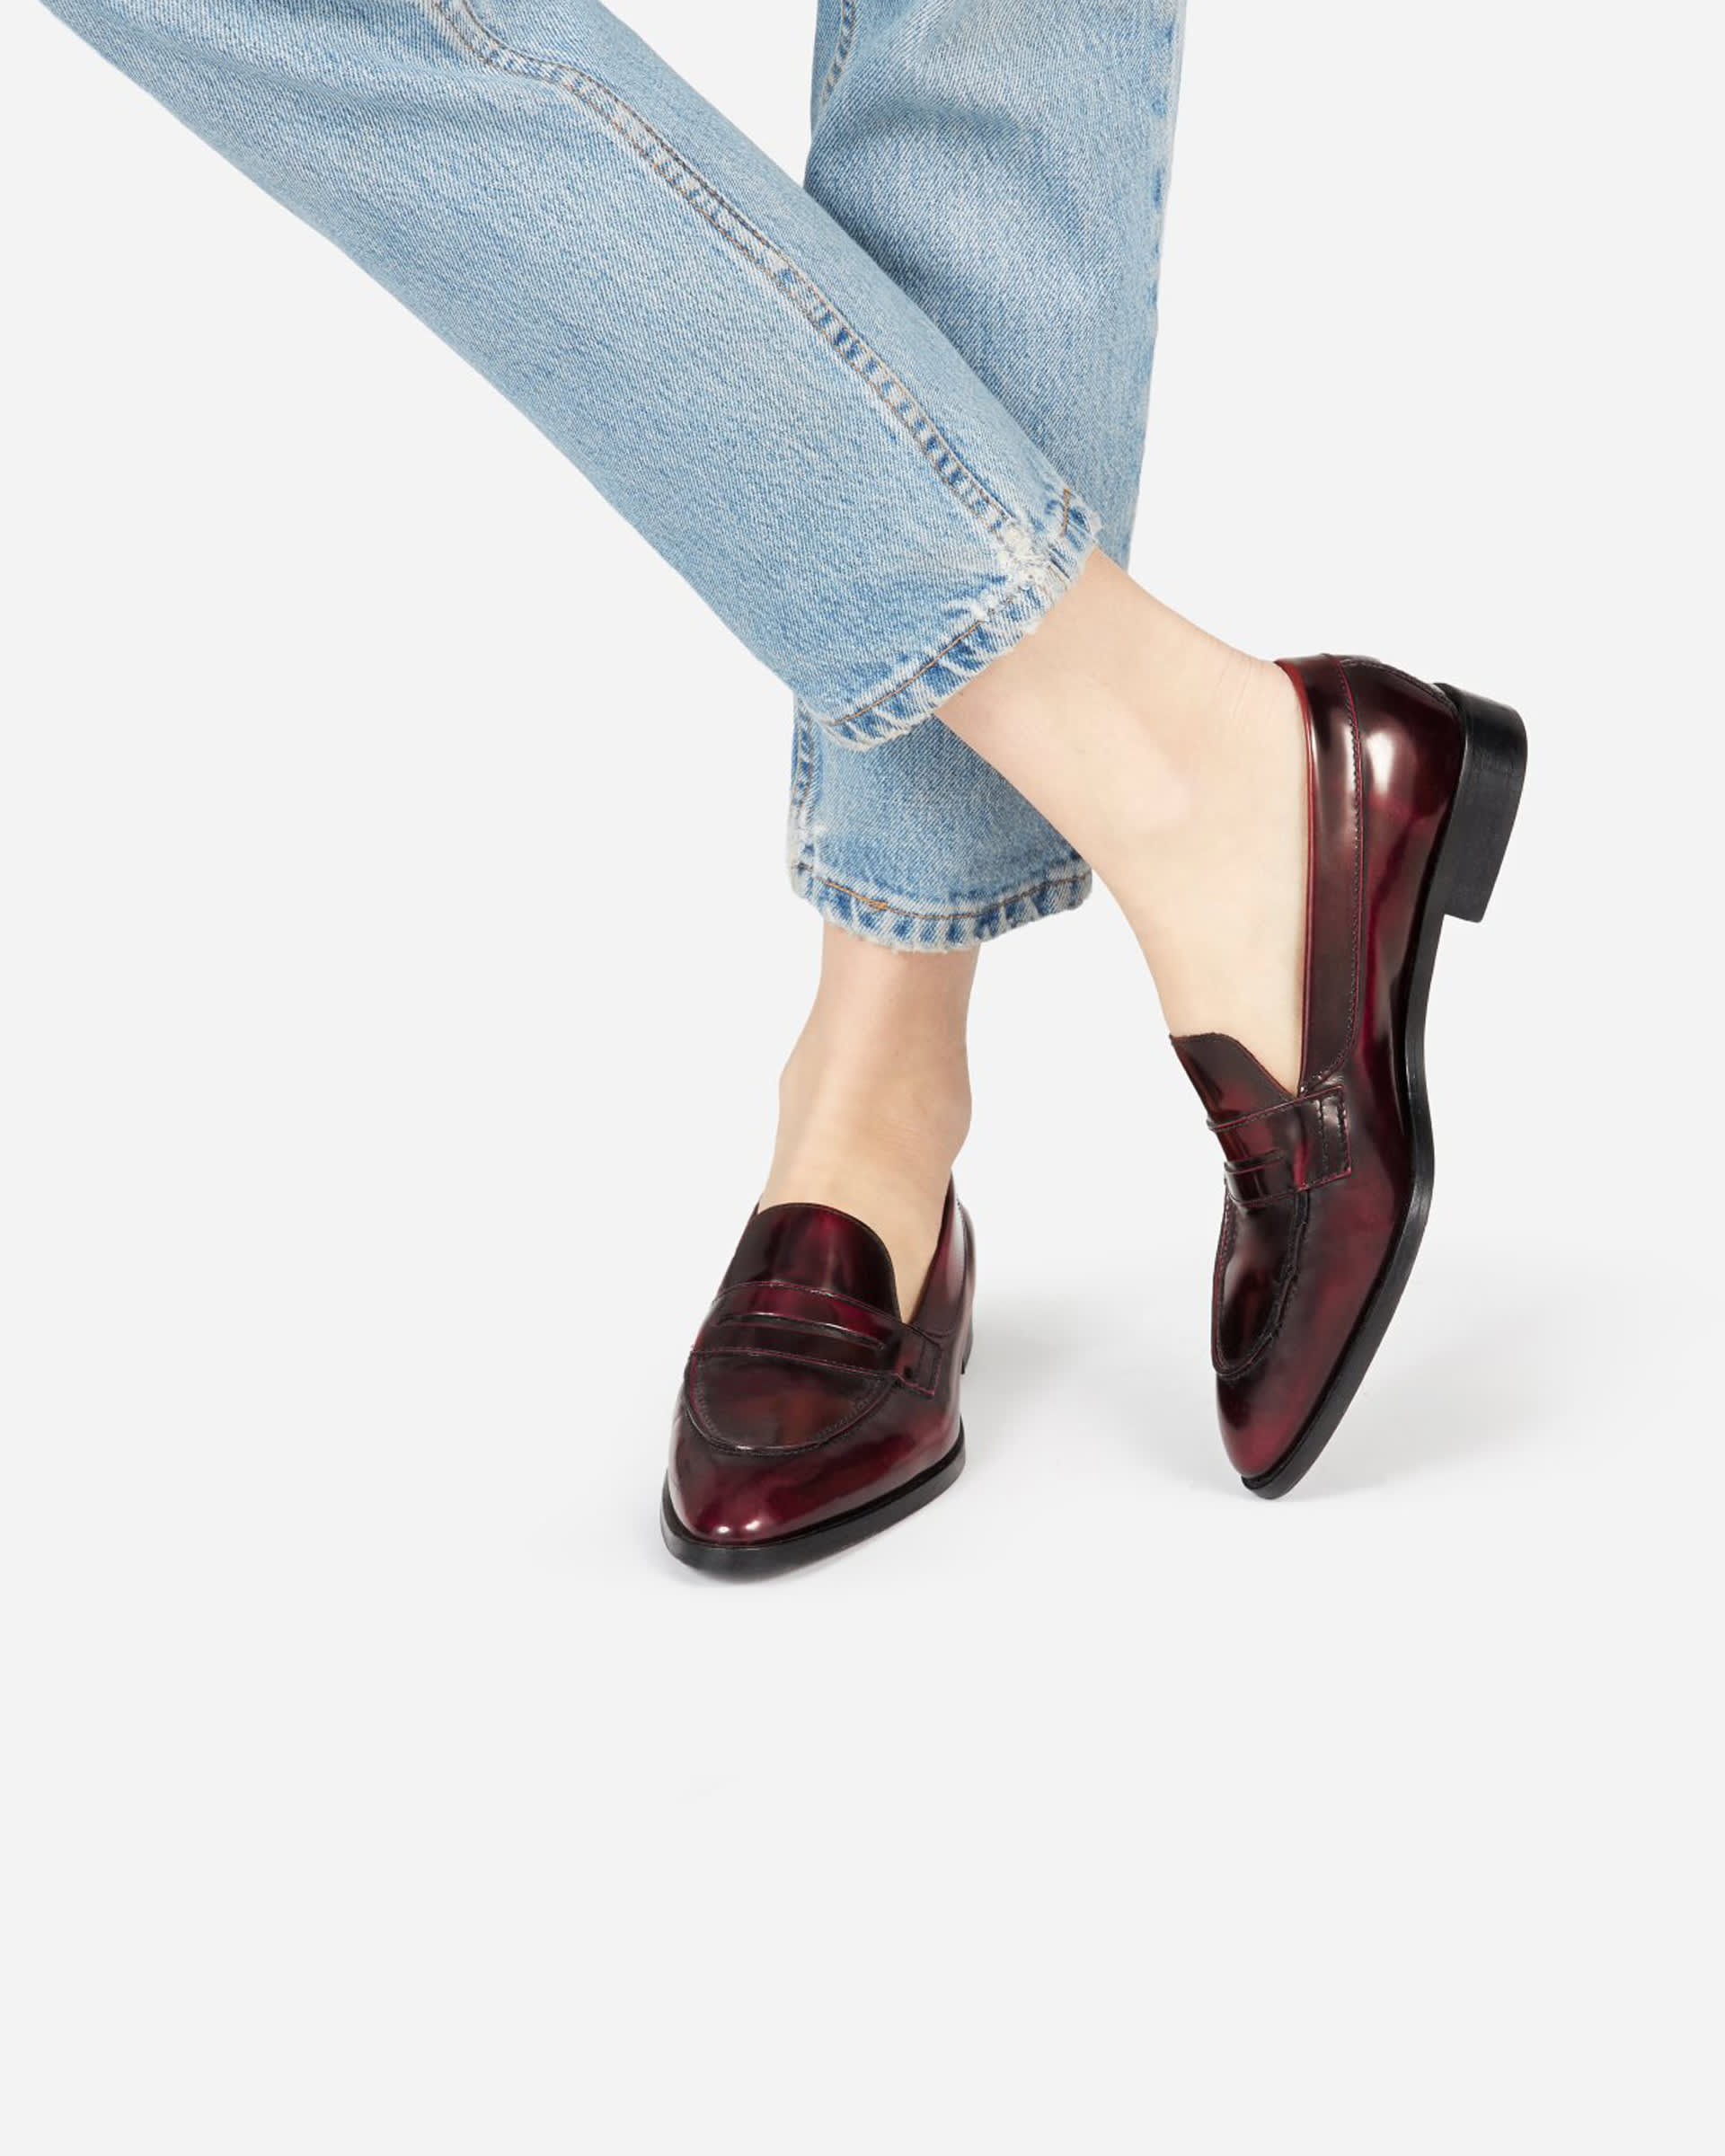 everlane penny loafer review